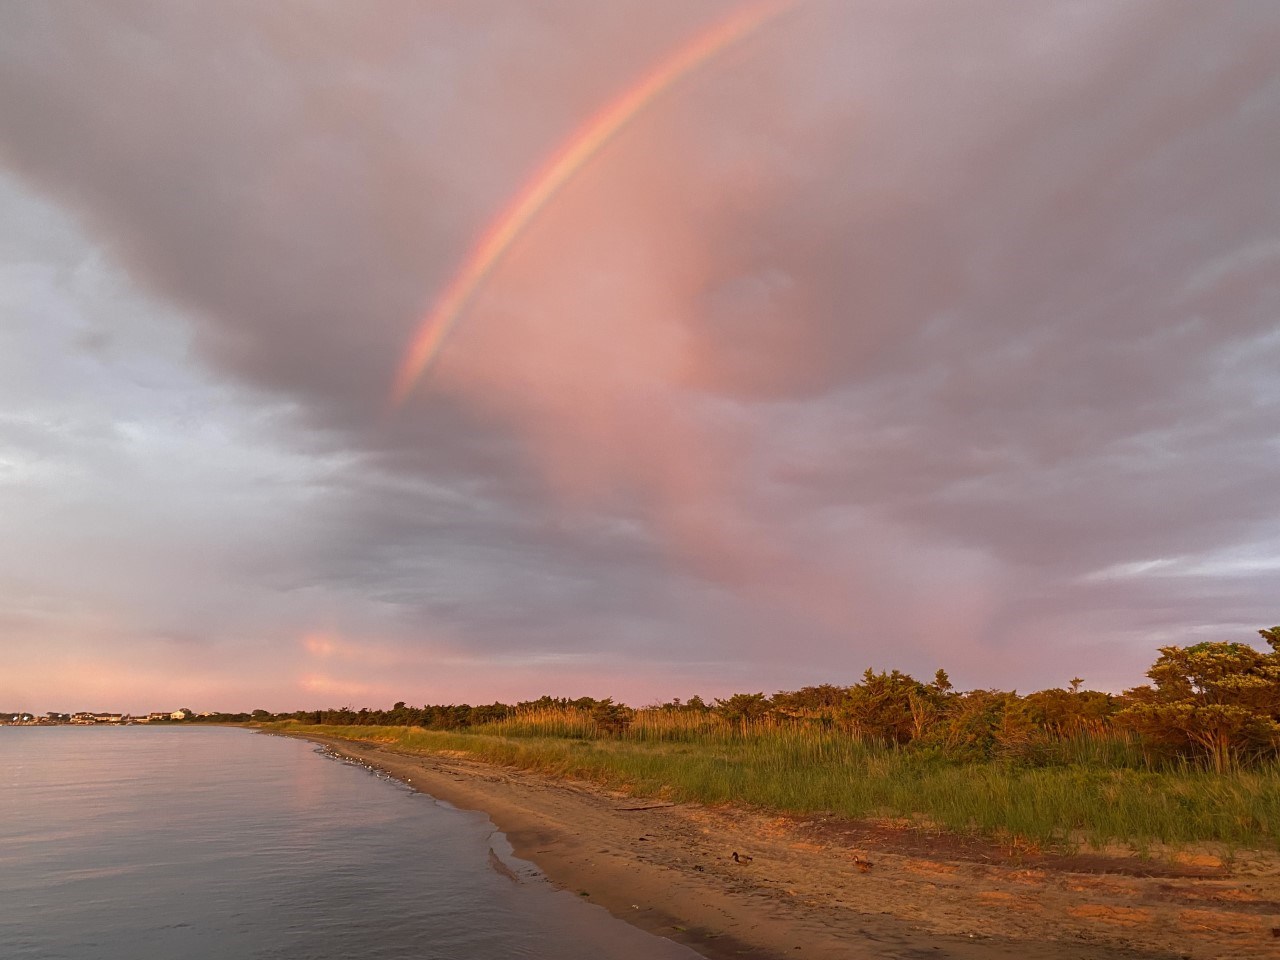 A rainbow over water and wetlands at sunset